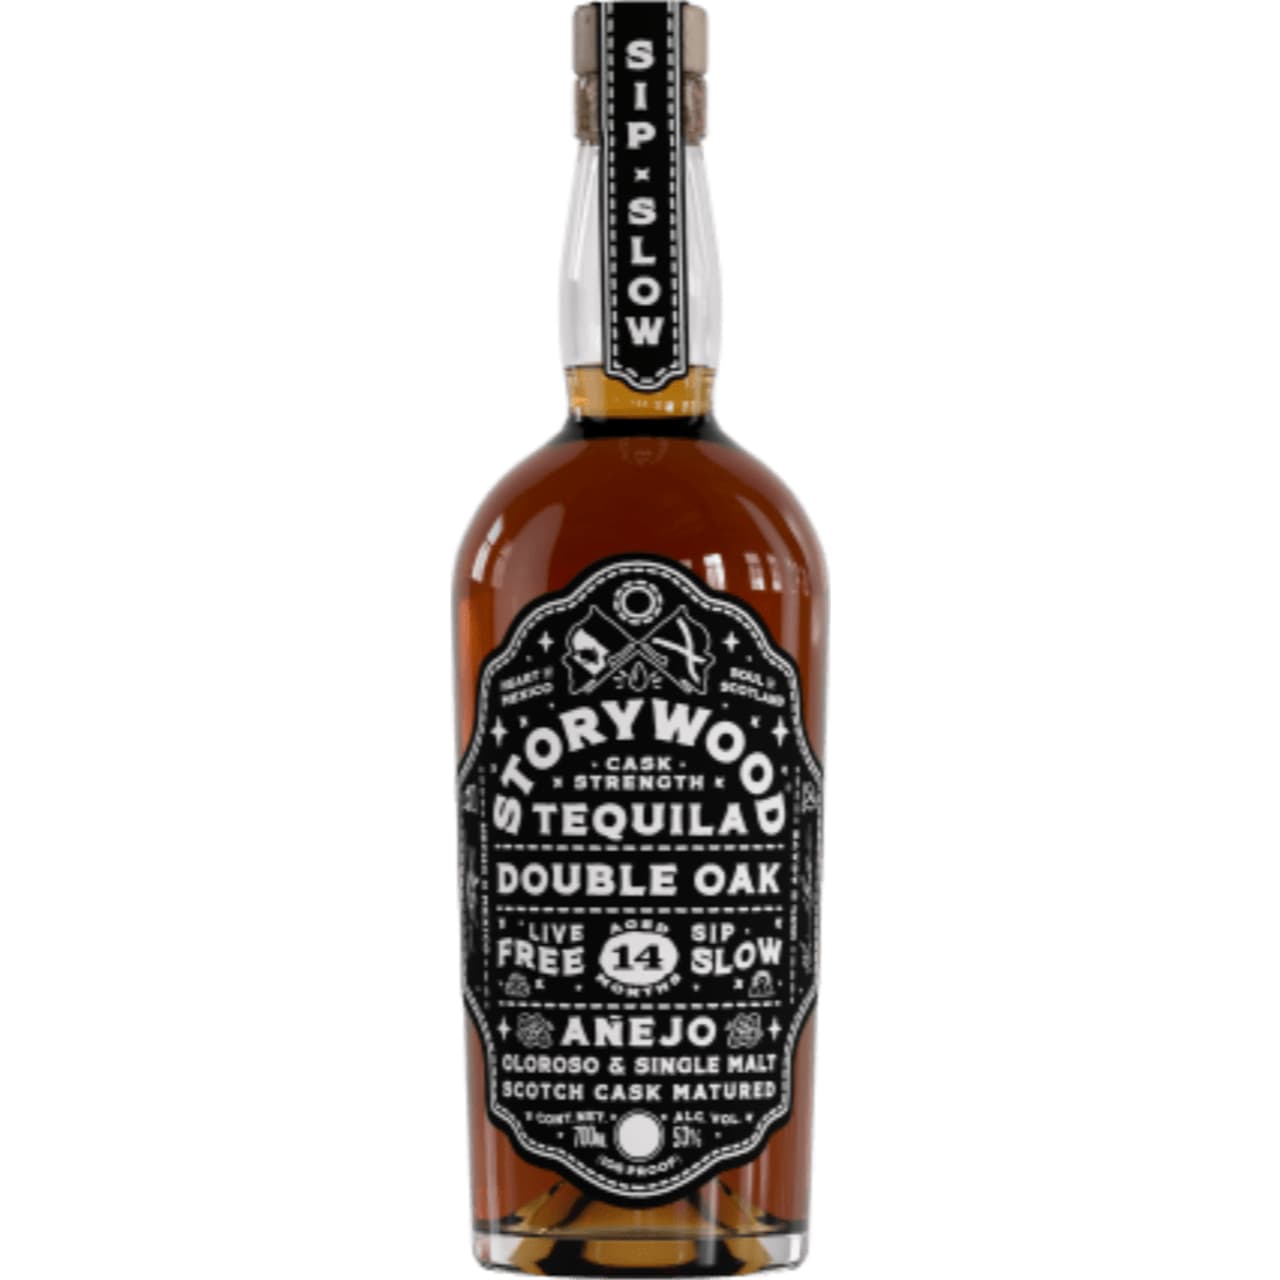 Product Image - Storywood Double Oak Cask Strength Tequila